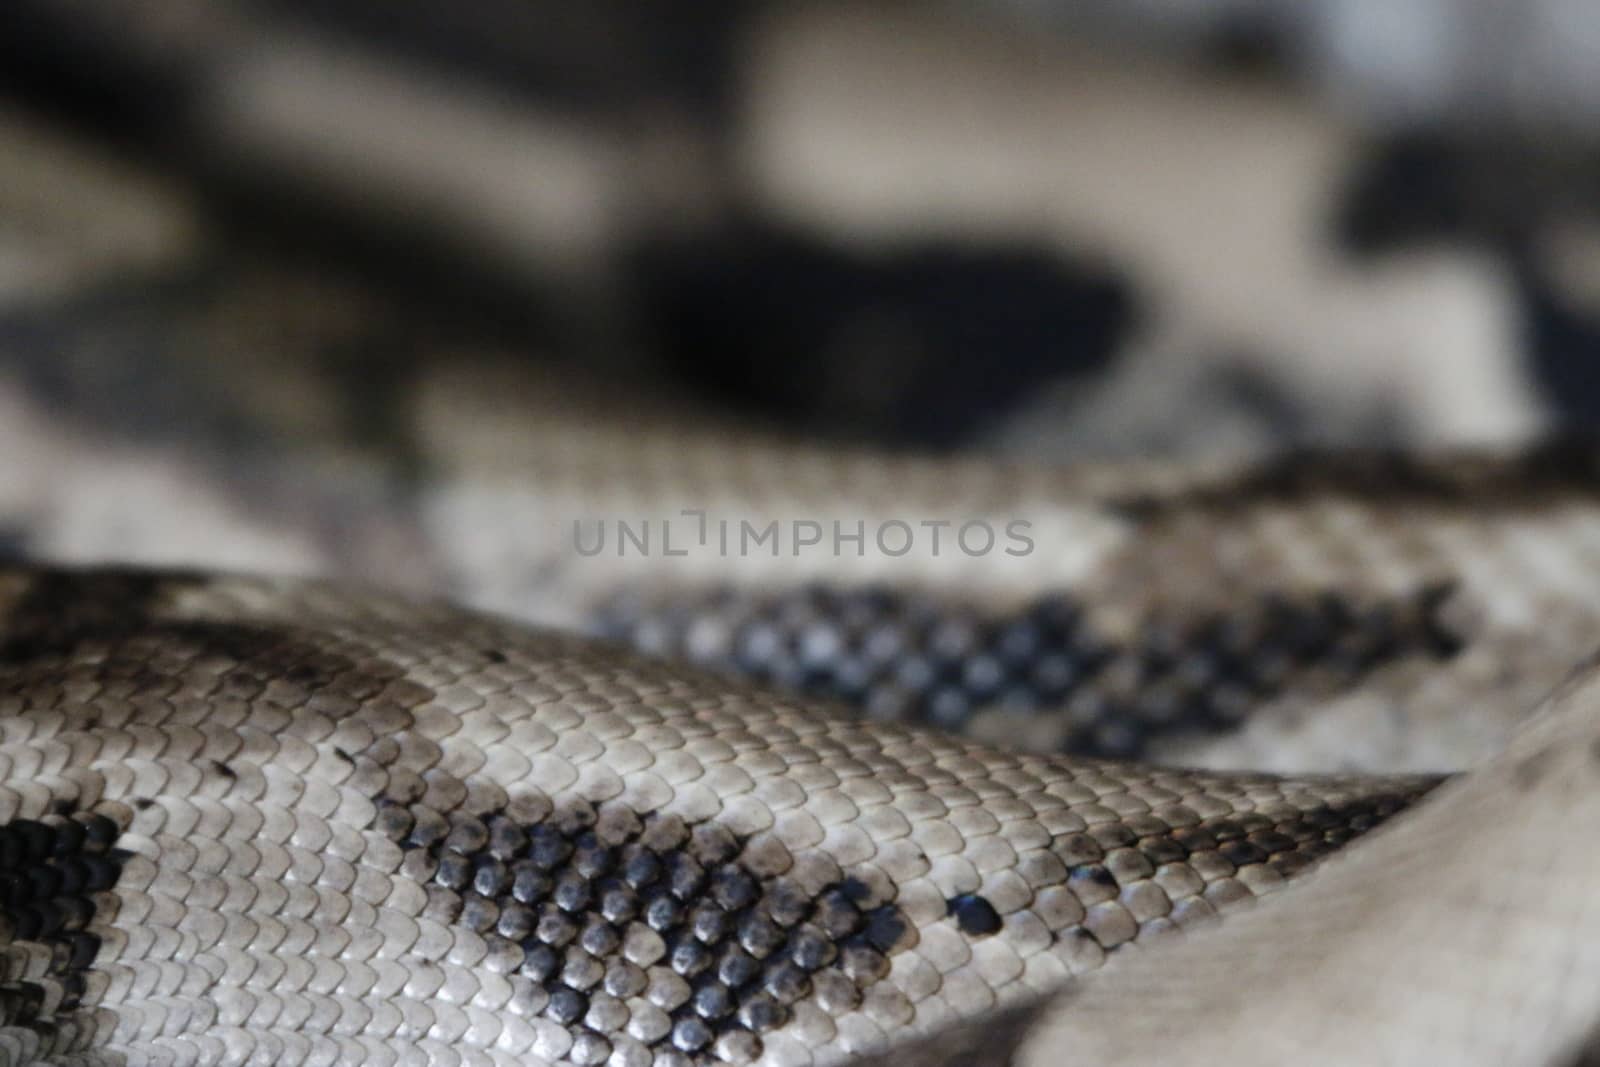 snake skin closeup photo showing the details of the scales by mynewturtle1